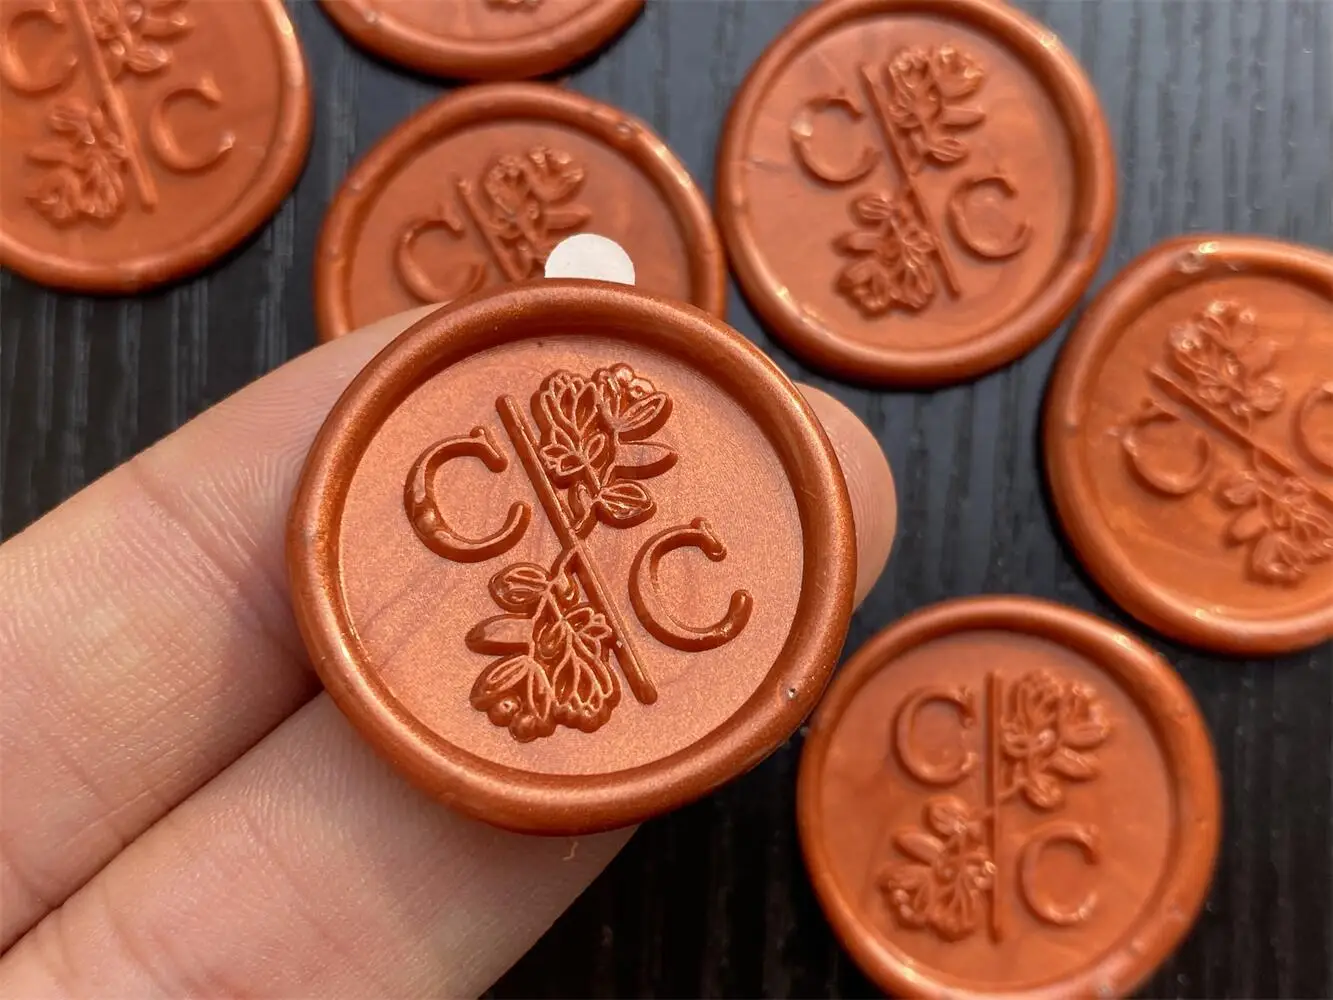 

100Pcs Wax Seals for Custom Your Logo or 2 Initials, Personalized Wedding Wax Seal Stickers, Self Adhesive Wax Seals For Wedding